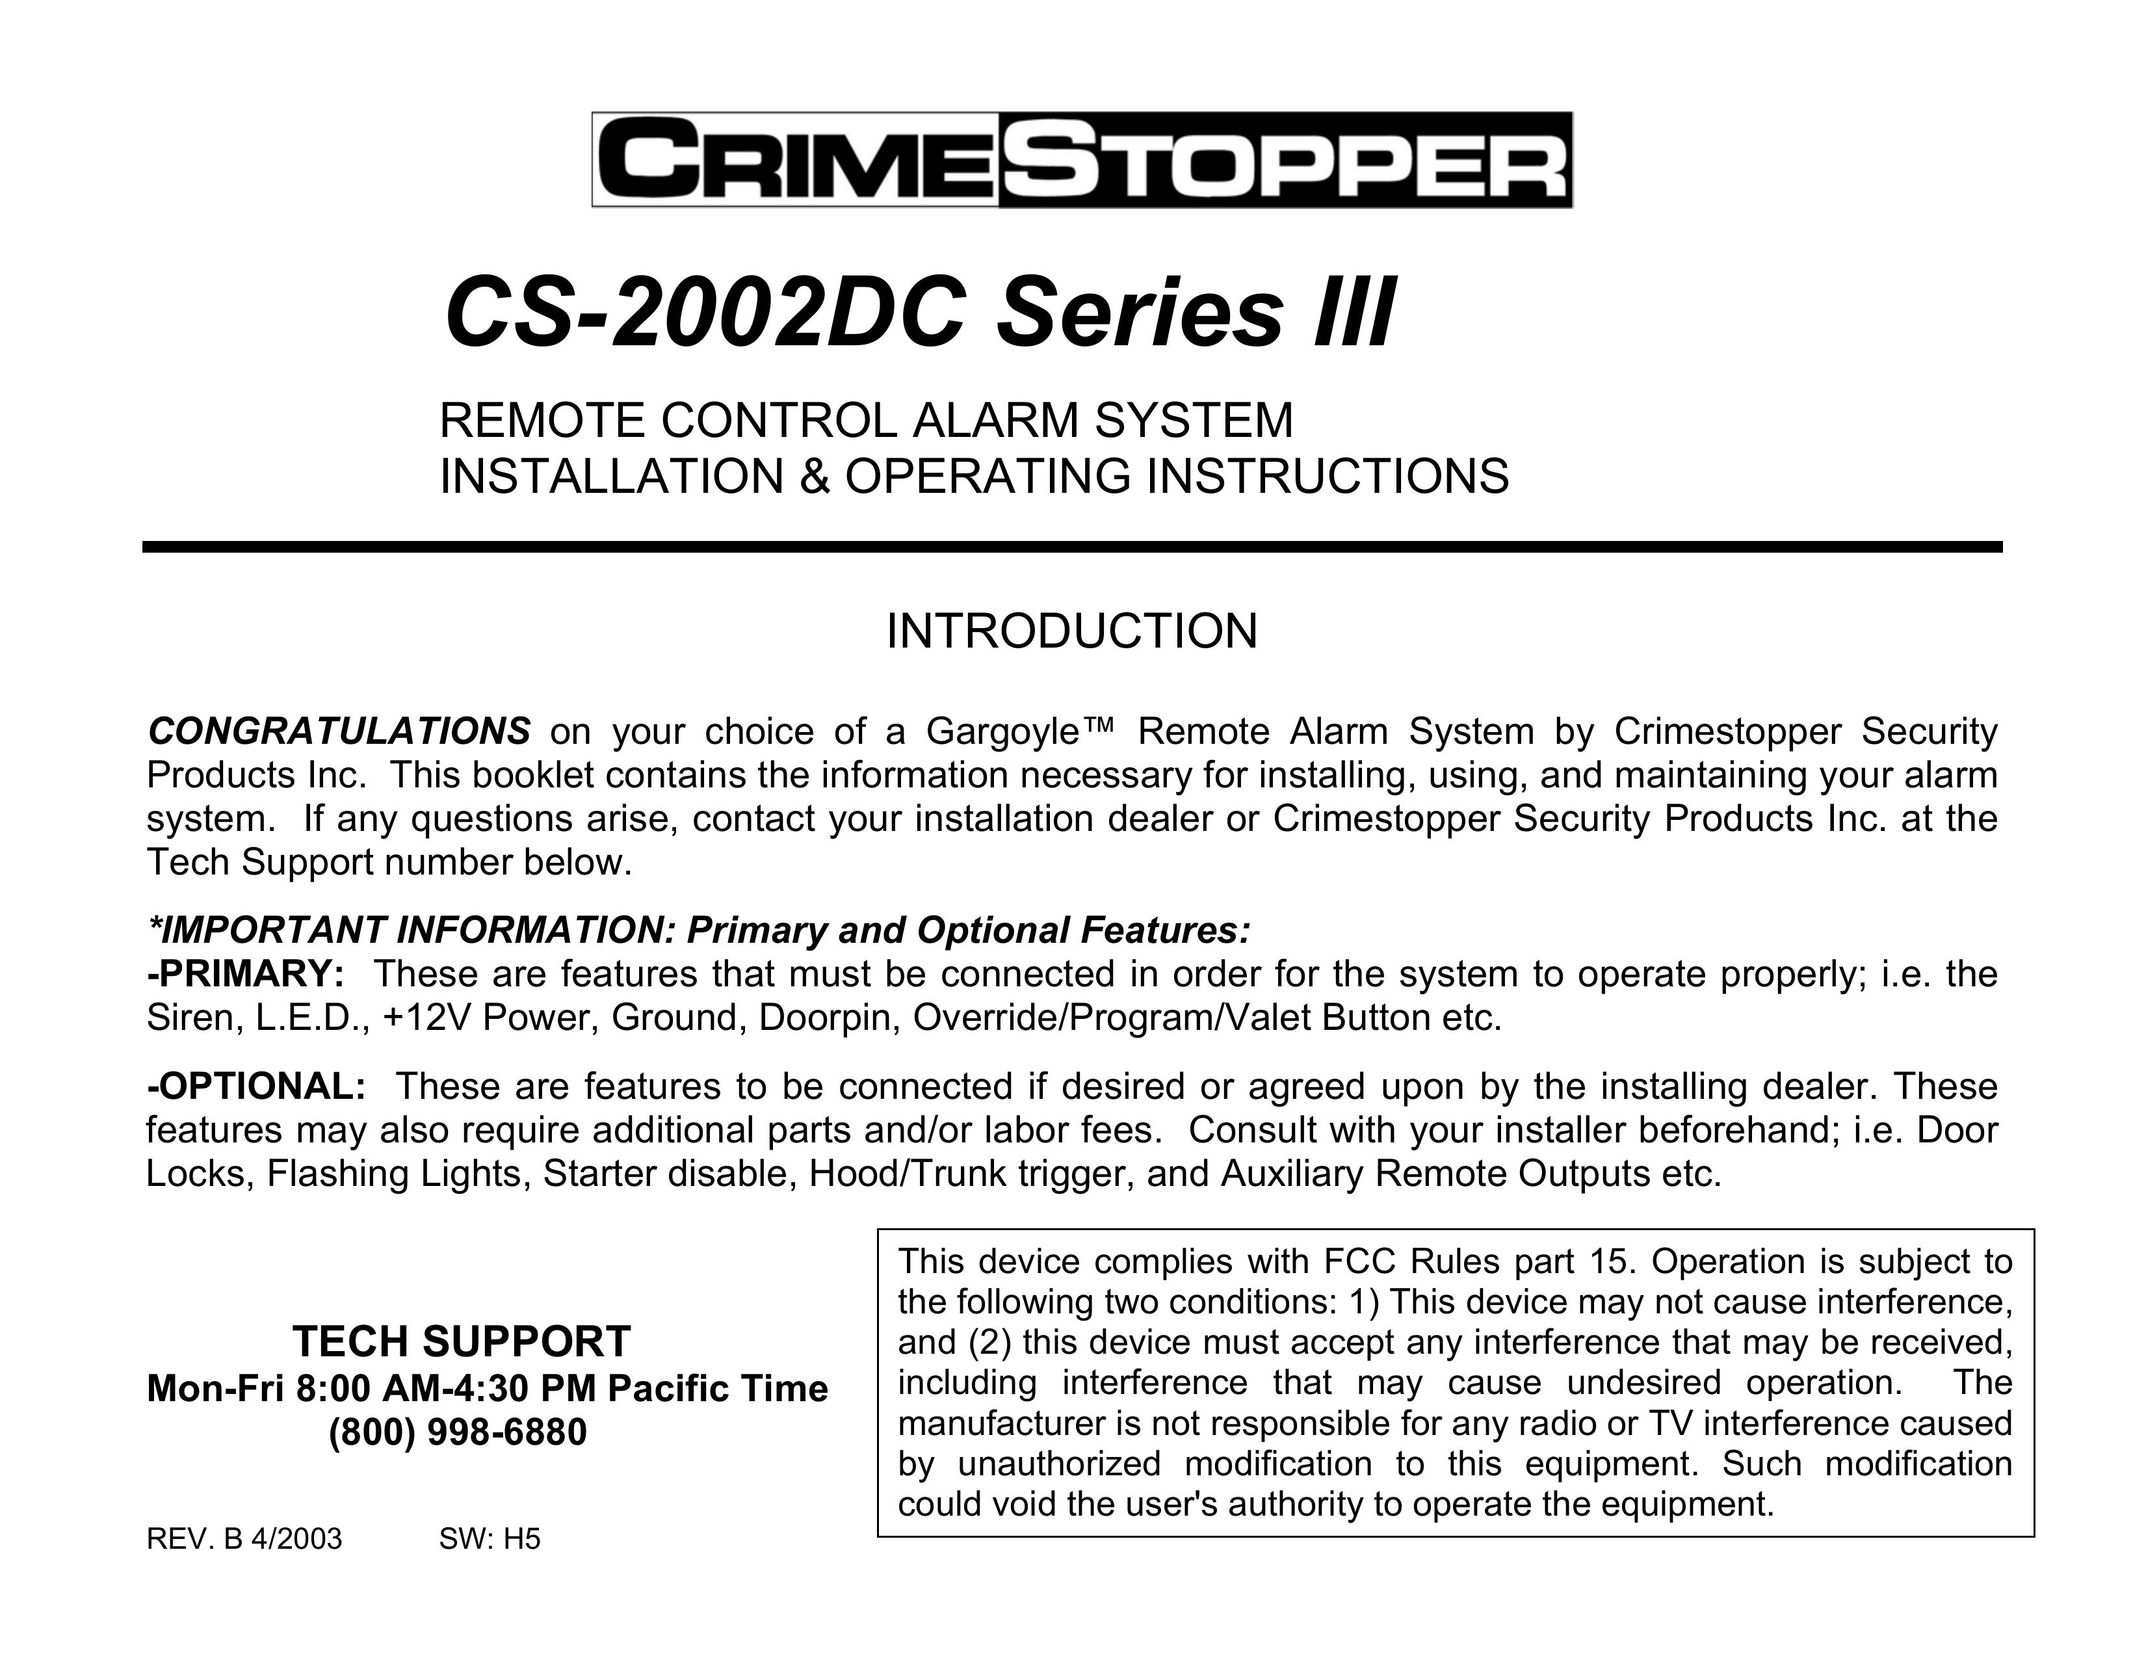 Crimestopper Security Products CS-2002DC SERIES III Home Security System User Manual